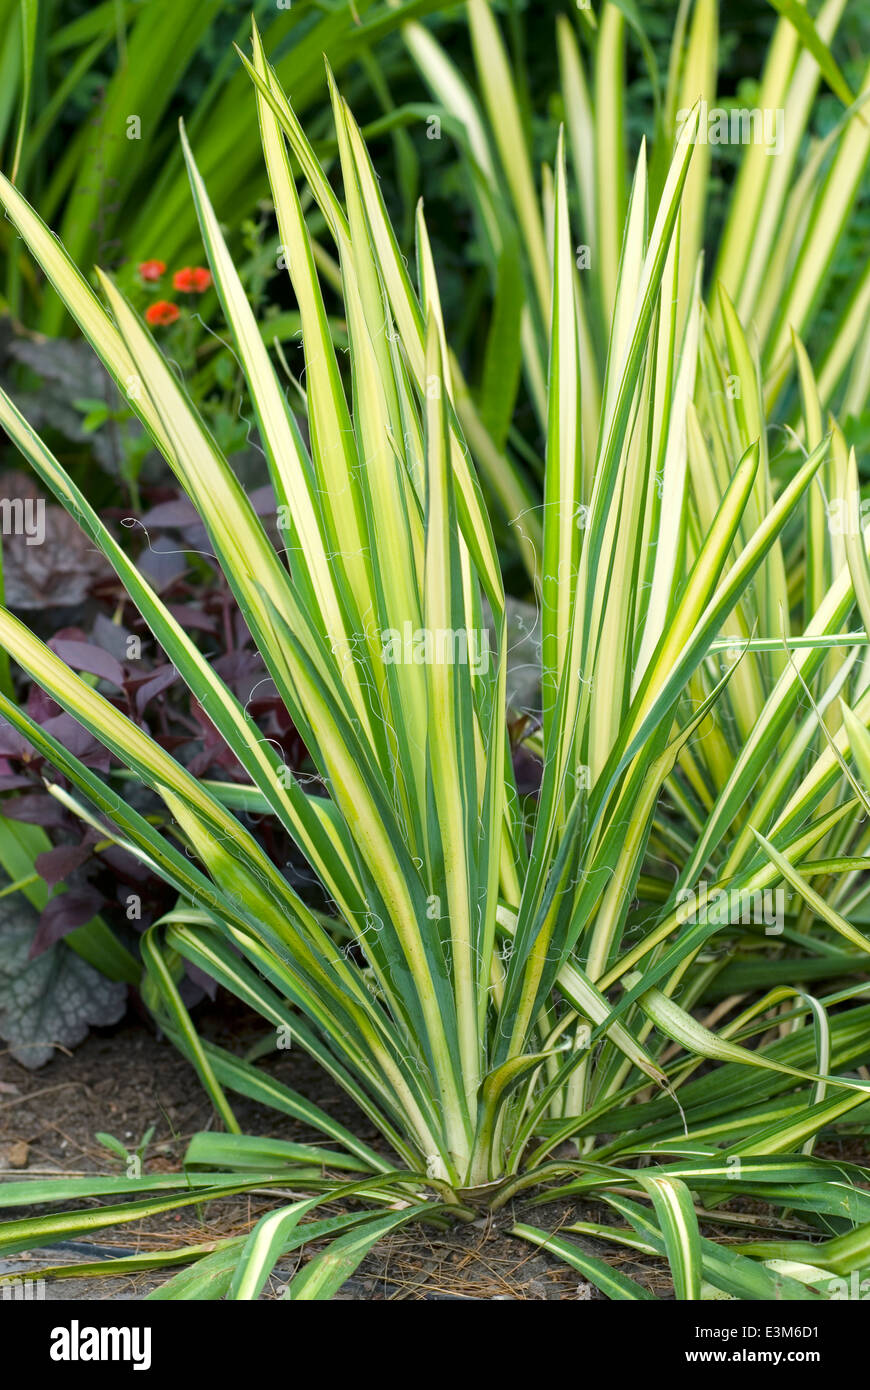 Yucca flaccida Golden Sword, Perennial, July. Variegated yellow and green plant. Stock Photo